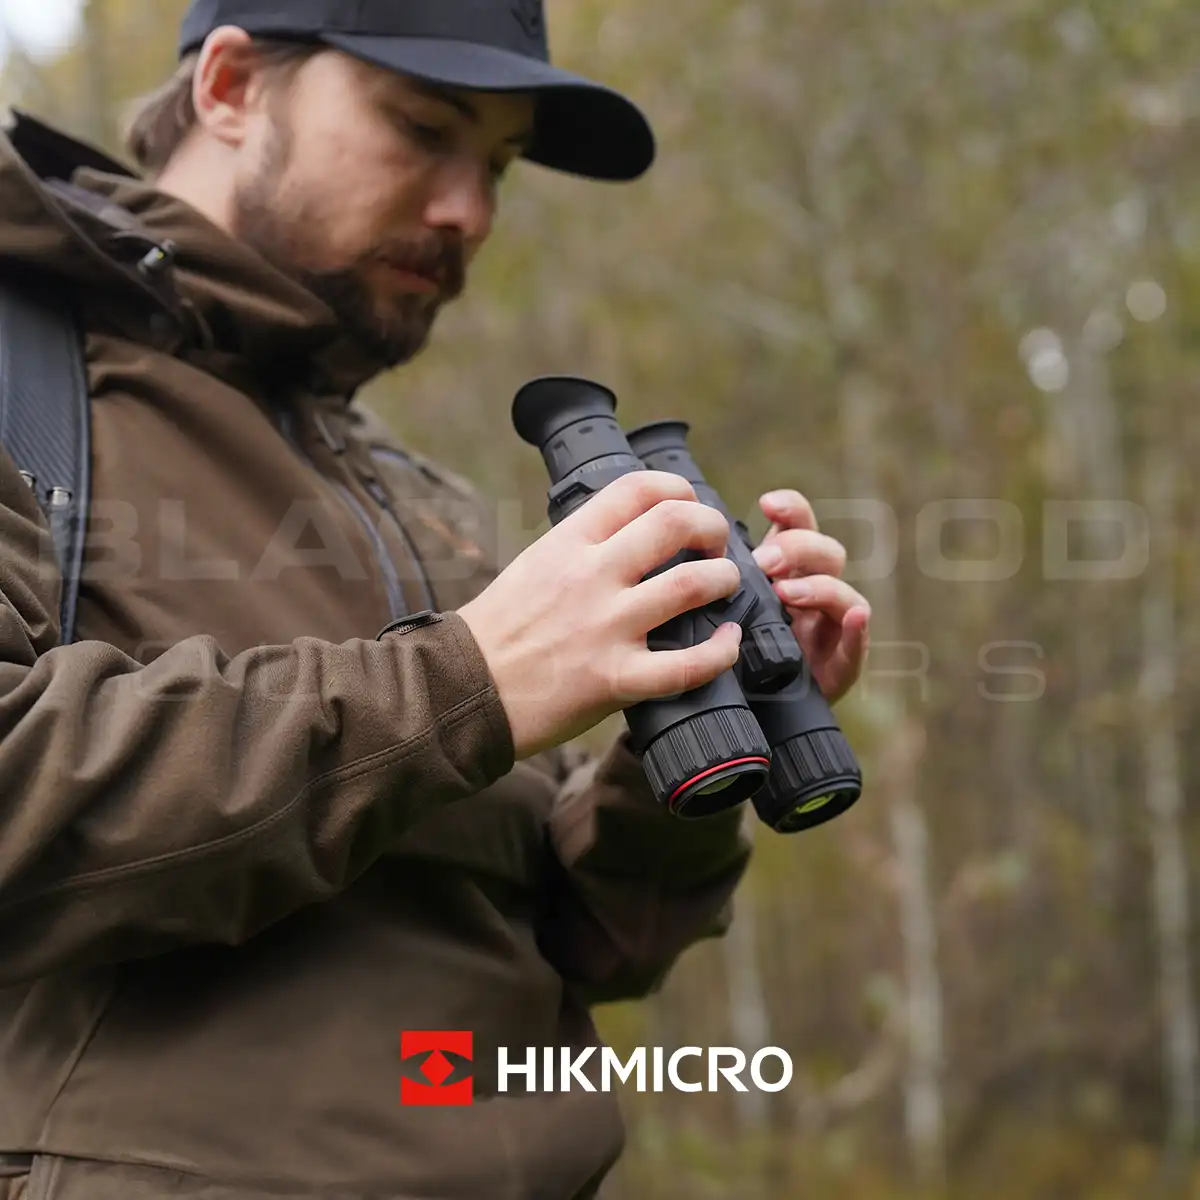 HikMicro Habrok Thermal Binoculars fitted into hands HQ35L model